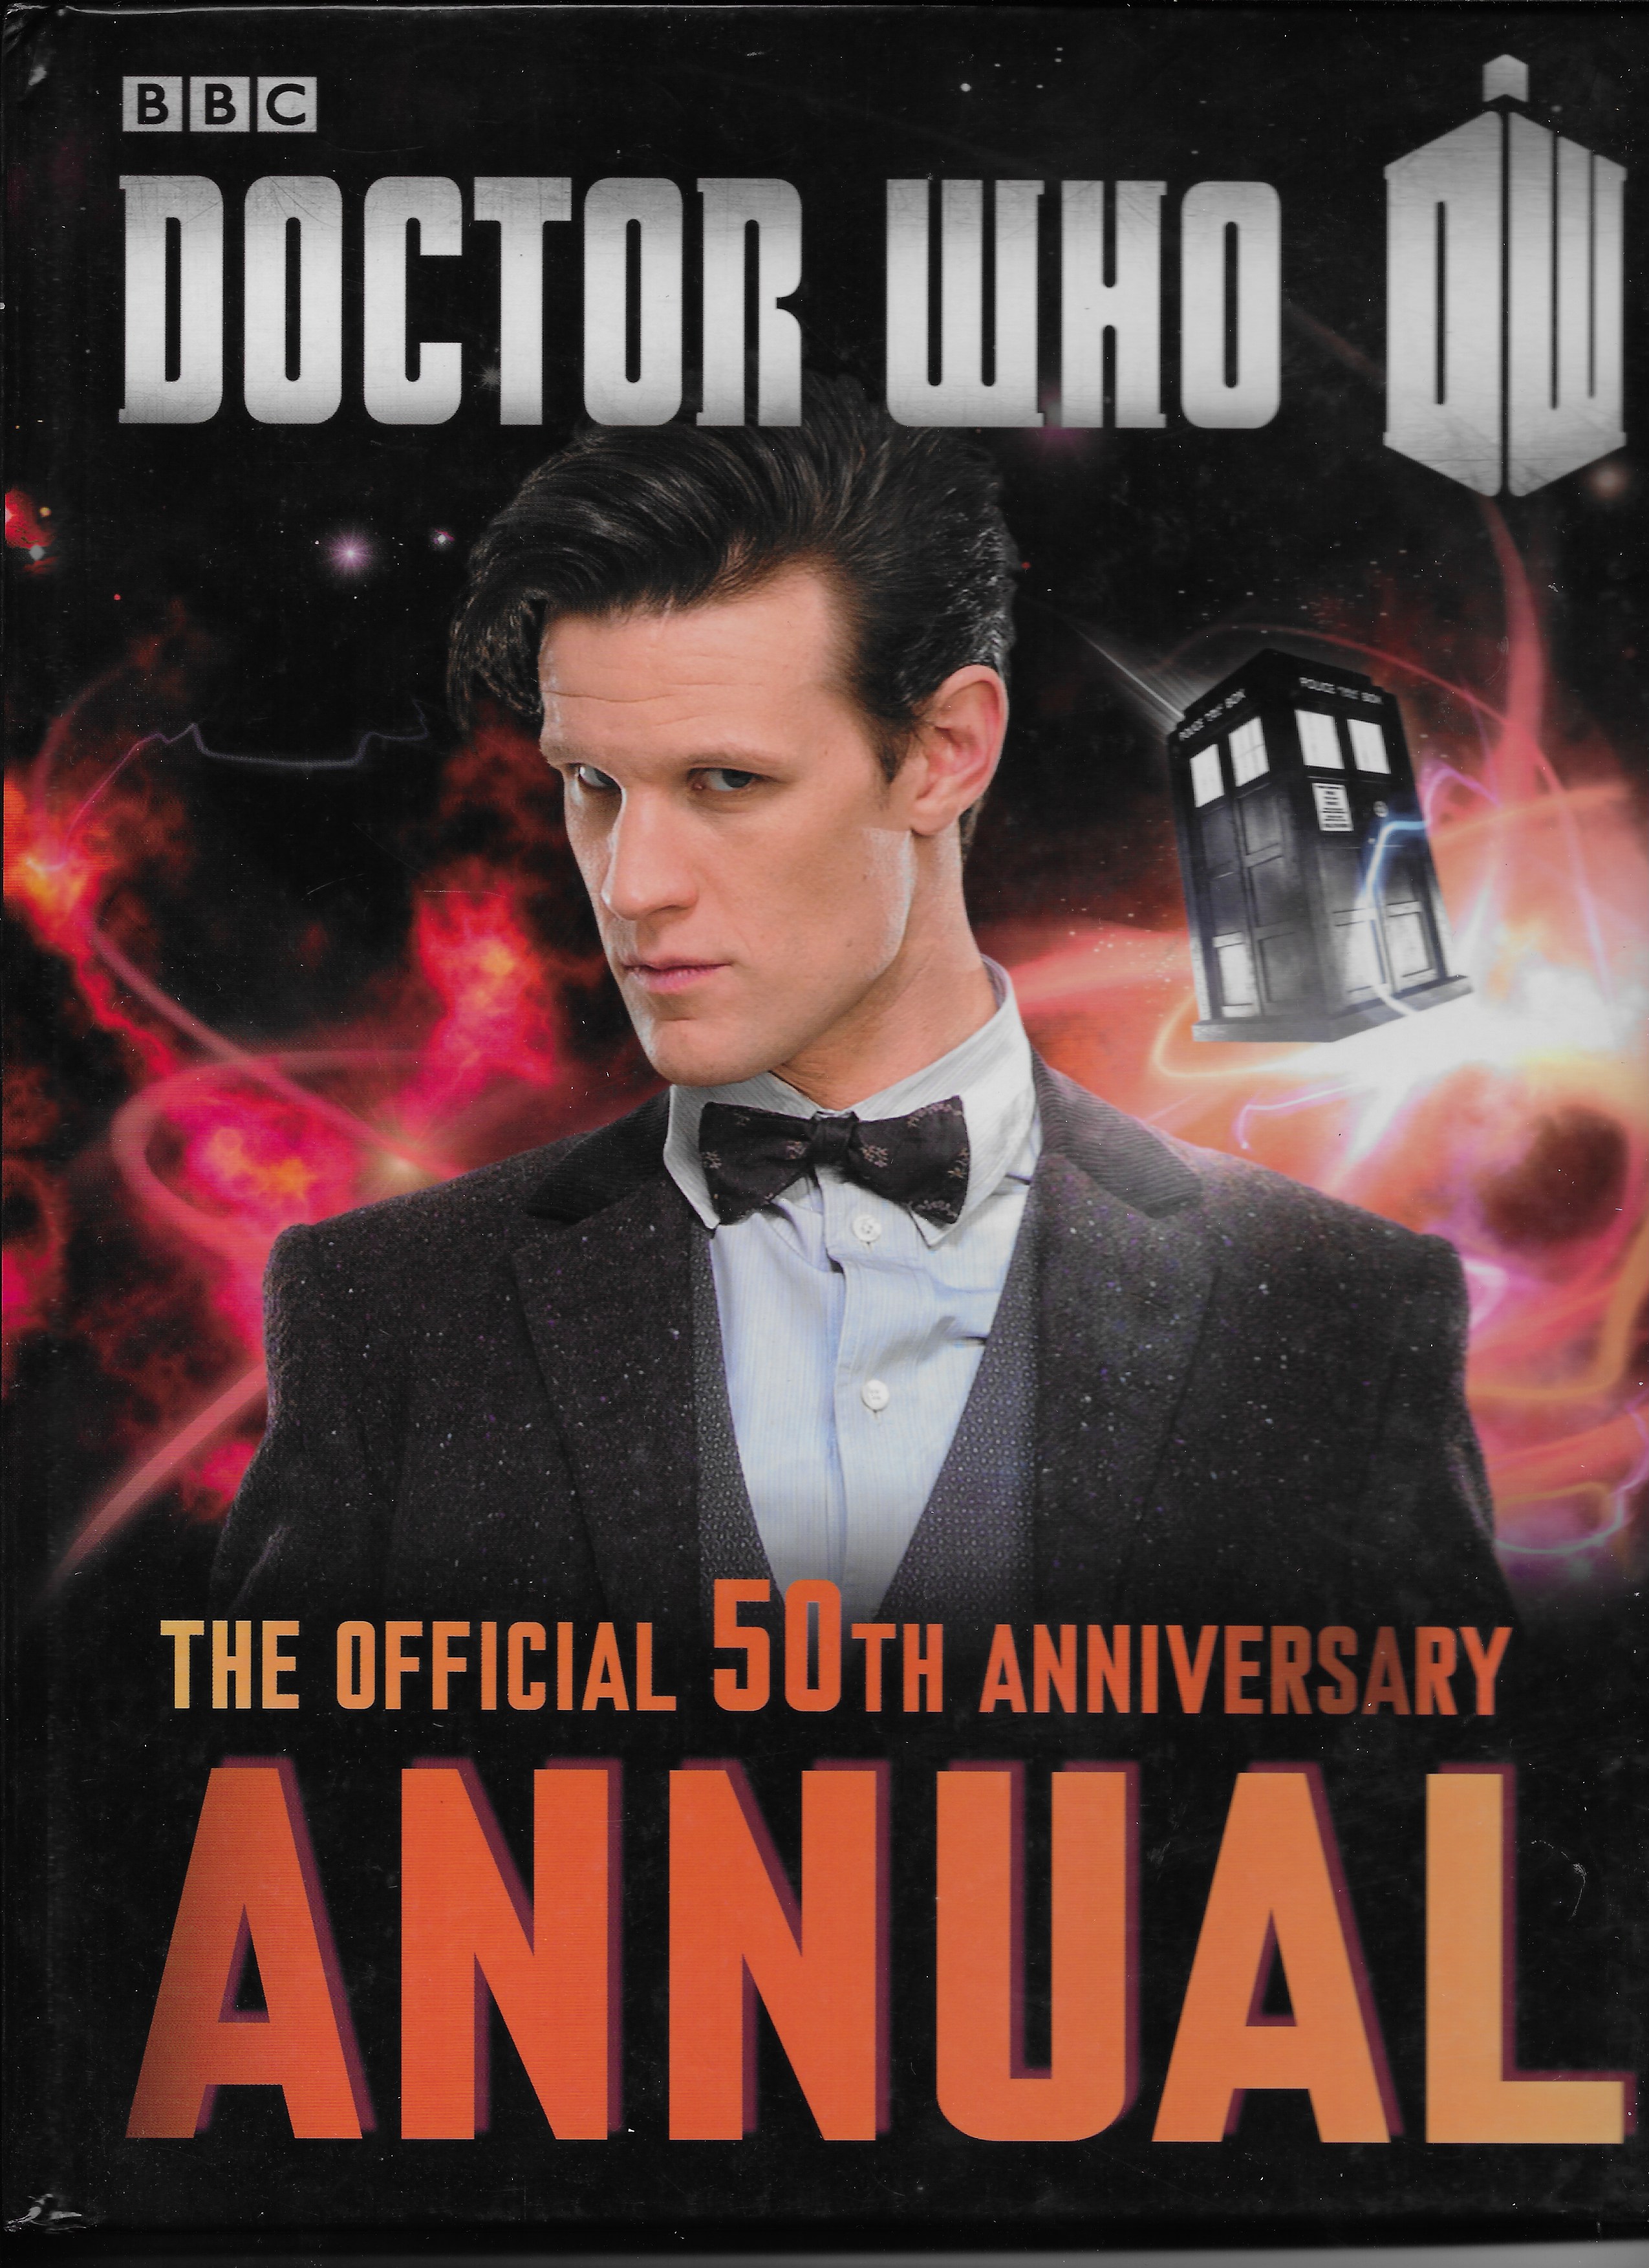 Picture of ISBN 978-1-40591-179-5 Doctor Who - The official 50th anniversary annual by artist Various from the BBC records and Tapes library